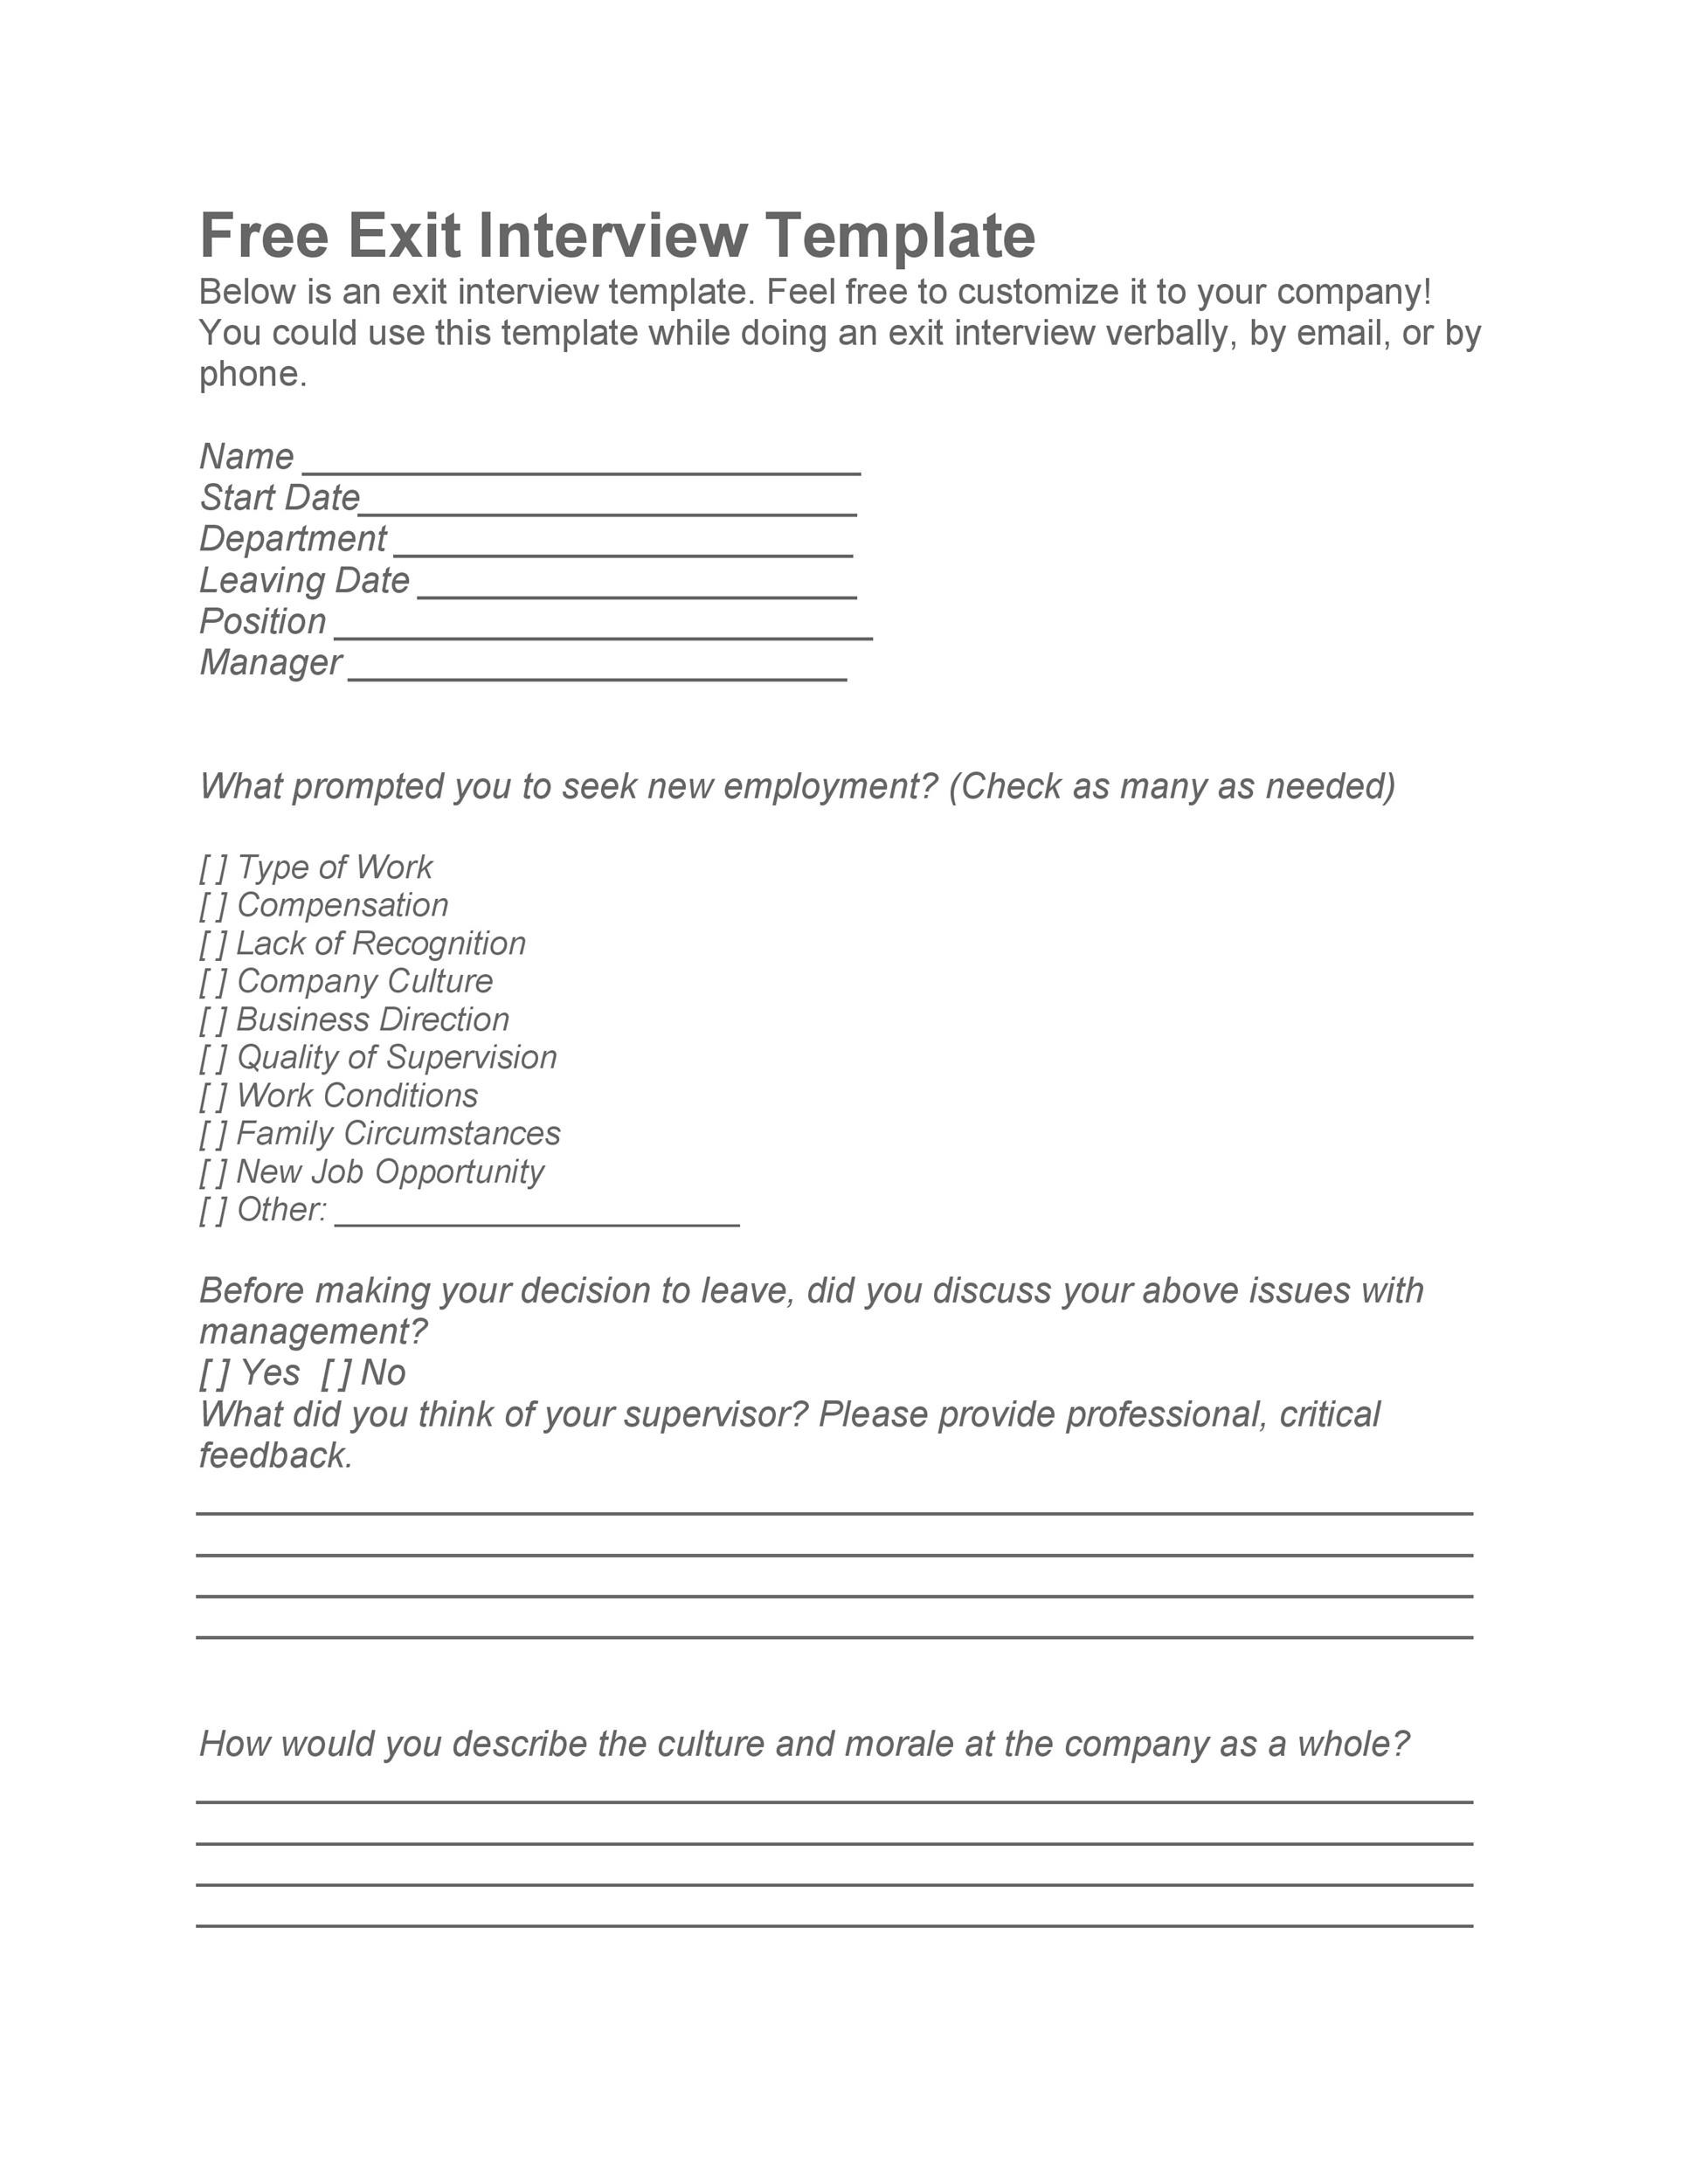 Free exit interview template 37